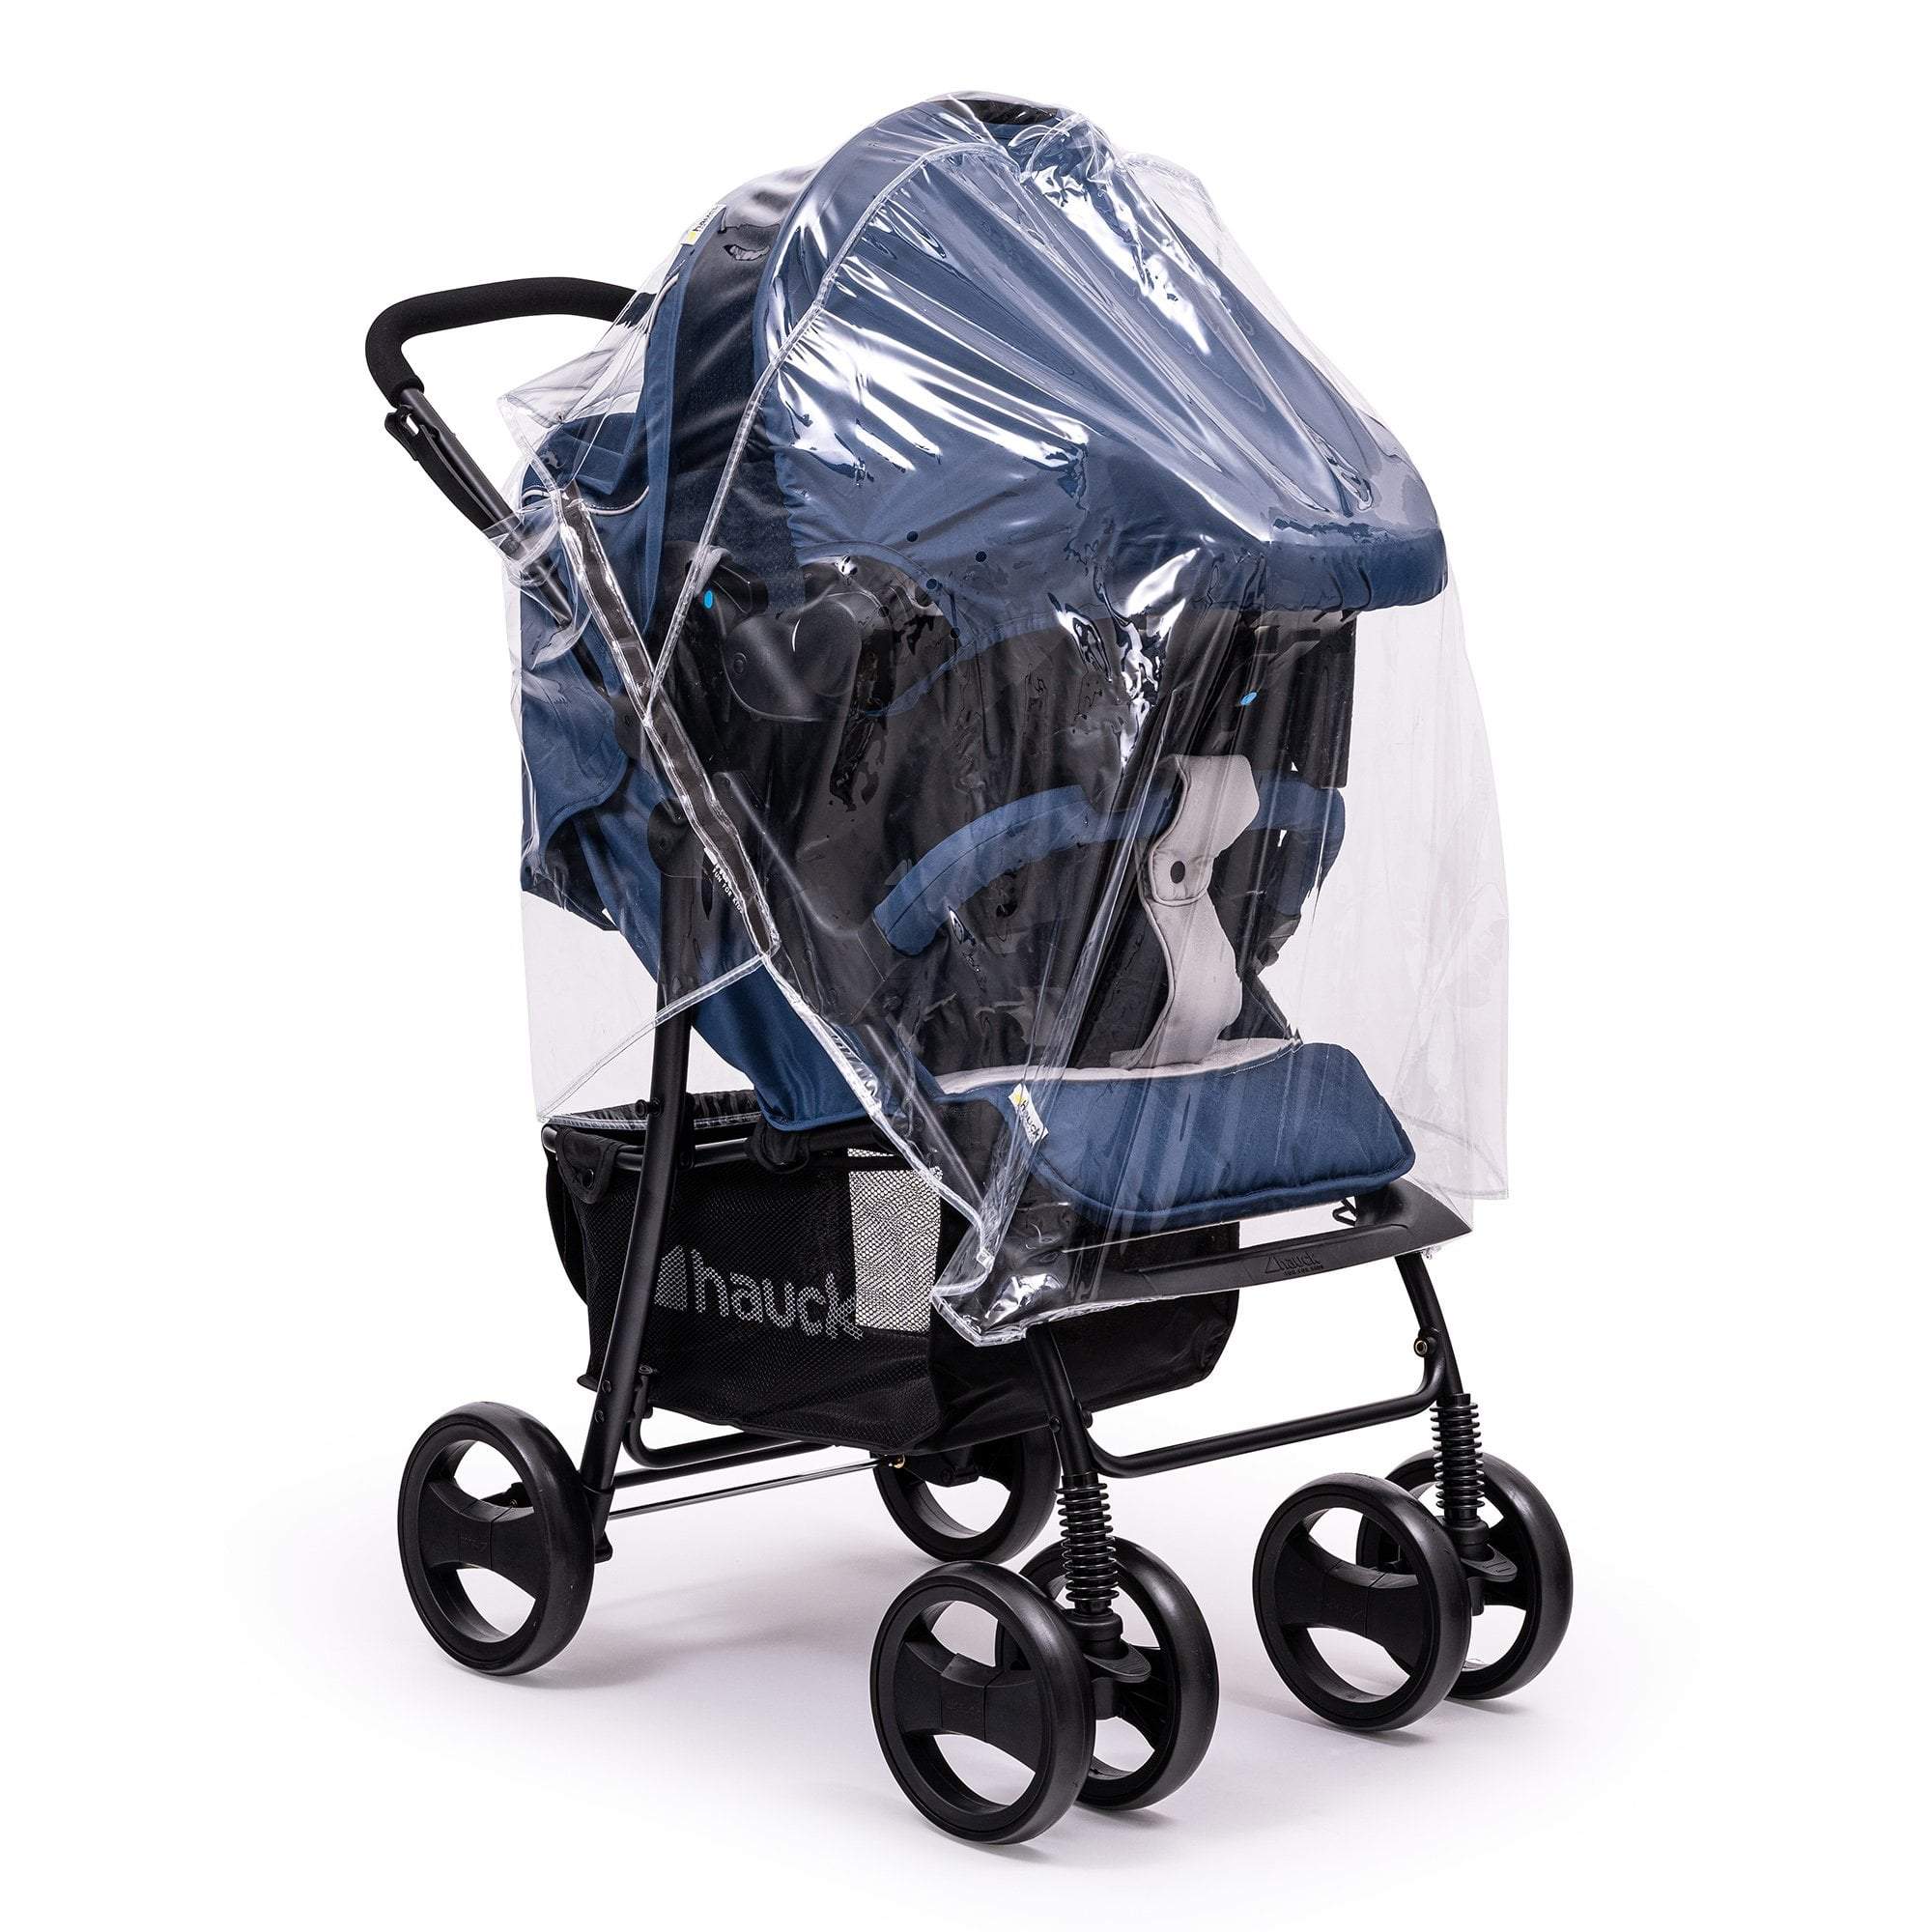 Travel System Raincover Compatible with Hybrid - Fits All Models - For Your Little One